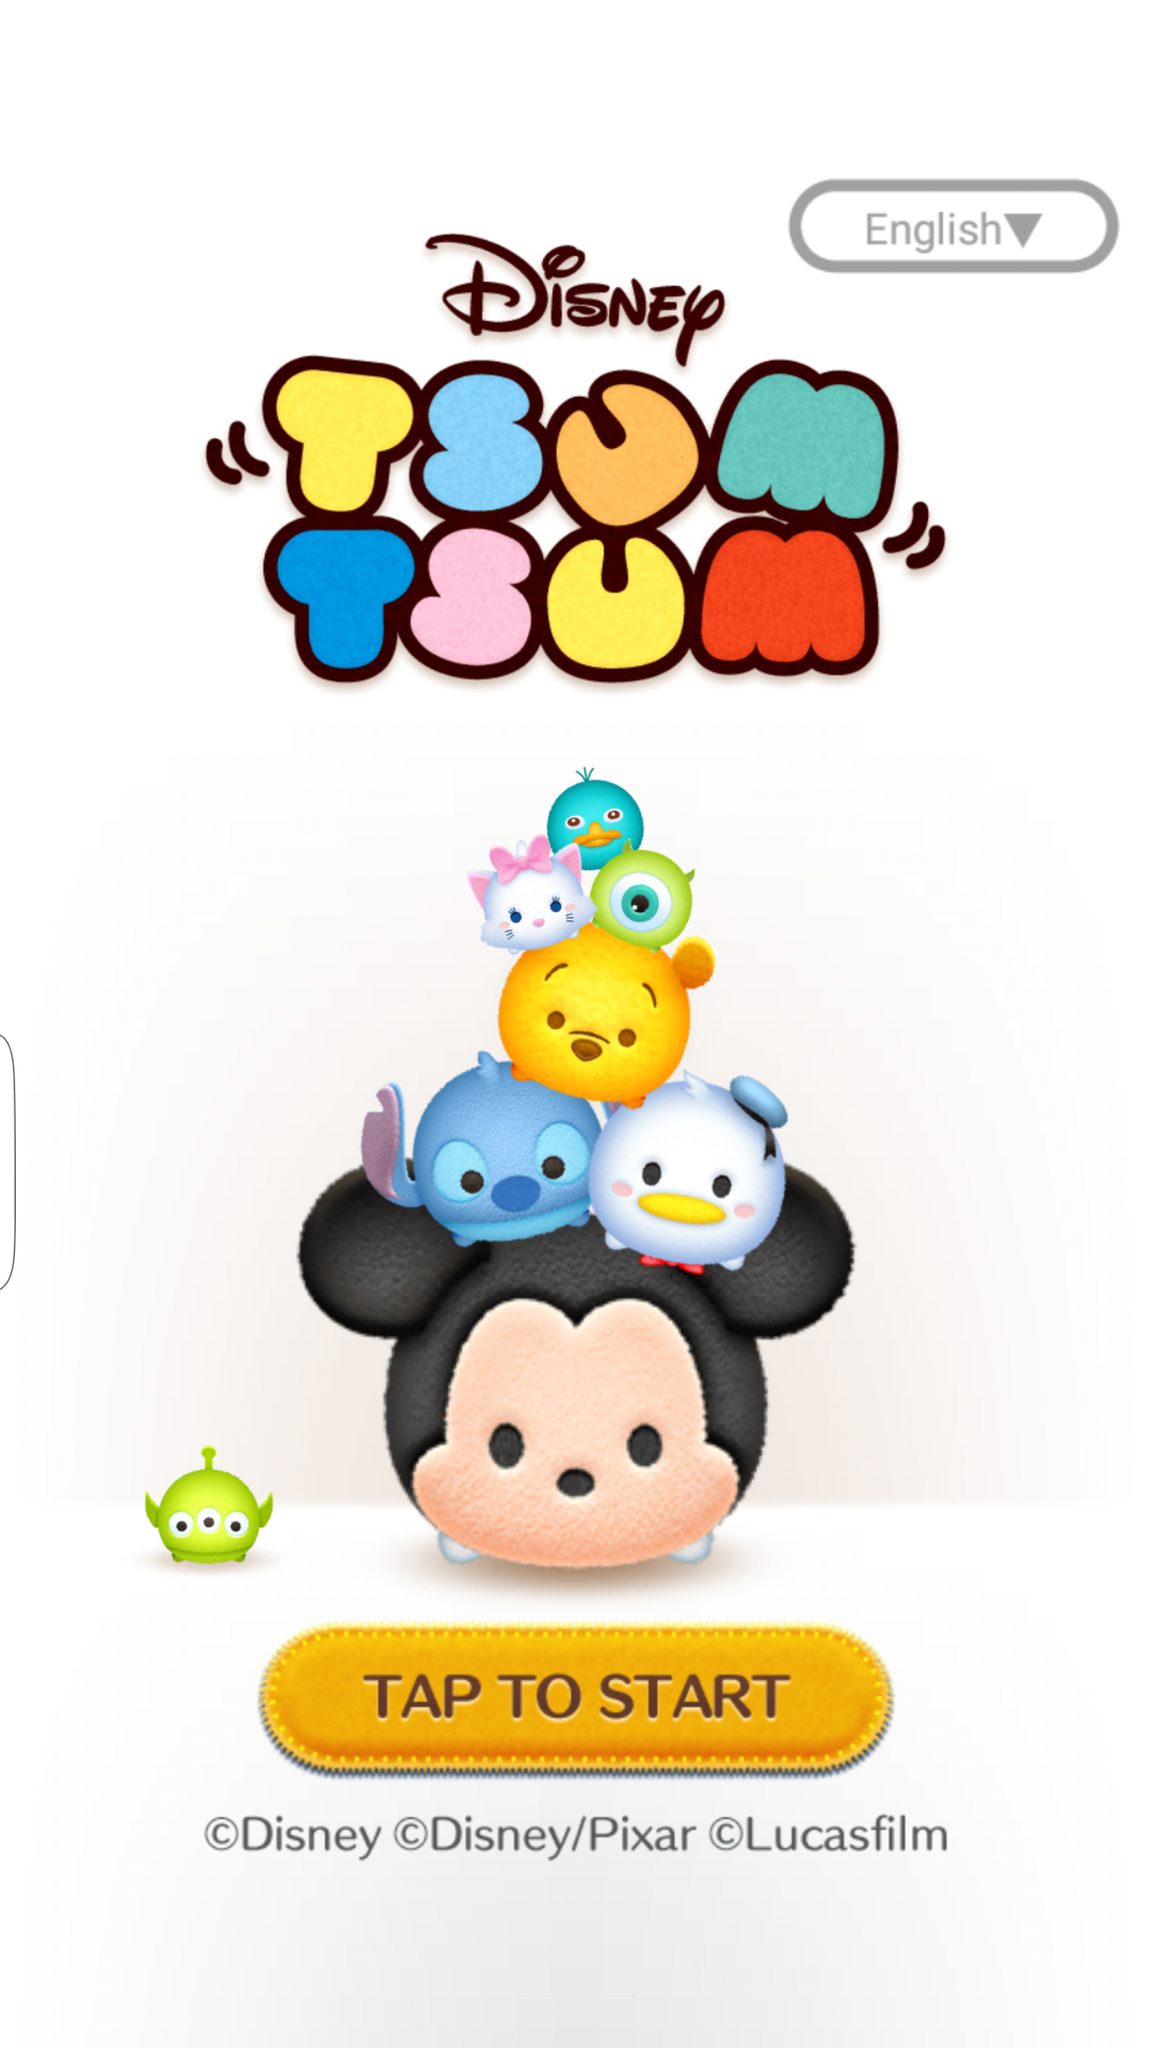 Things to do this Weekend: Go for the Tsum Tsum Roving Parade!